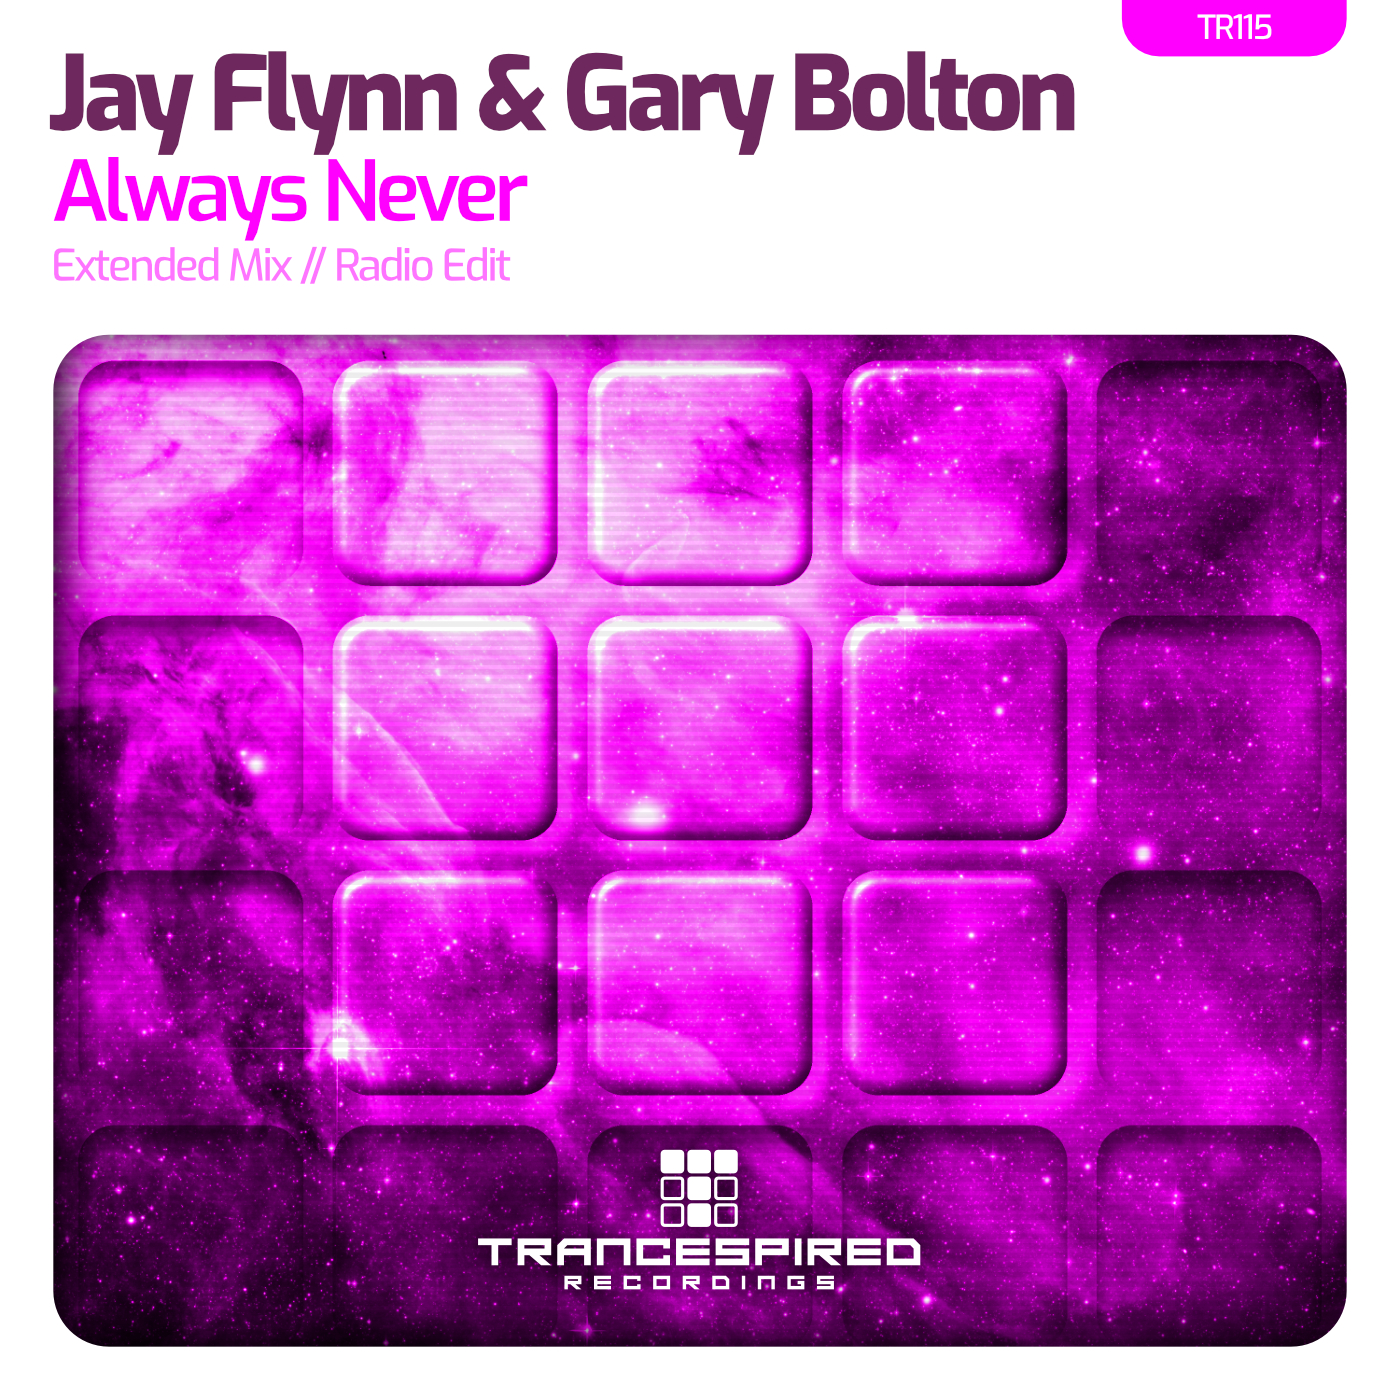 Jay Flynn and Gary Bolton presents Always Never on Trancespired Recordings